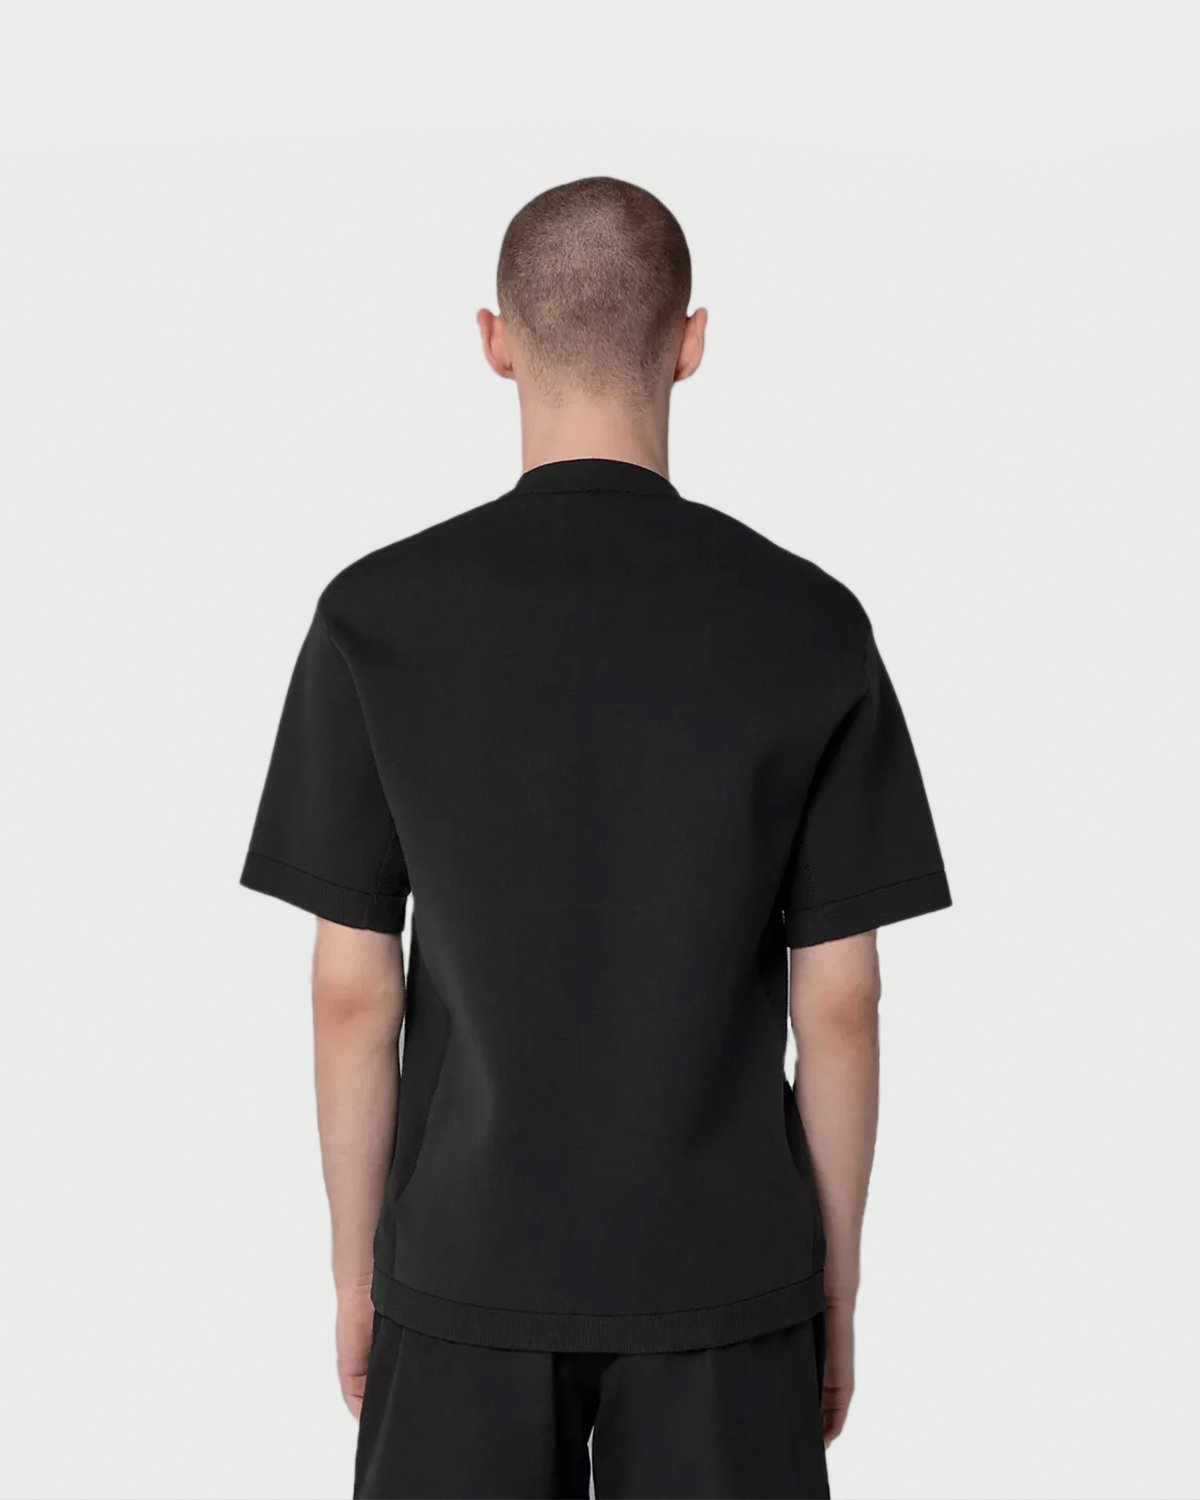 The North Face - Black Series Engineered Knit T-Shirt Black - Clothing - Black - Image 3